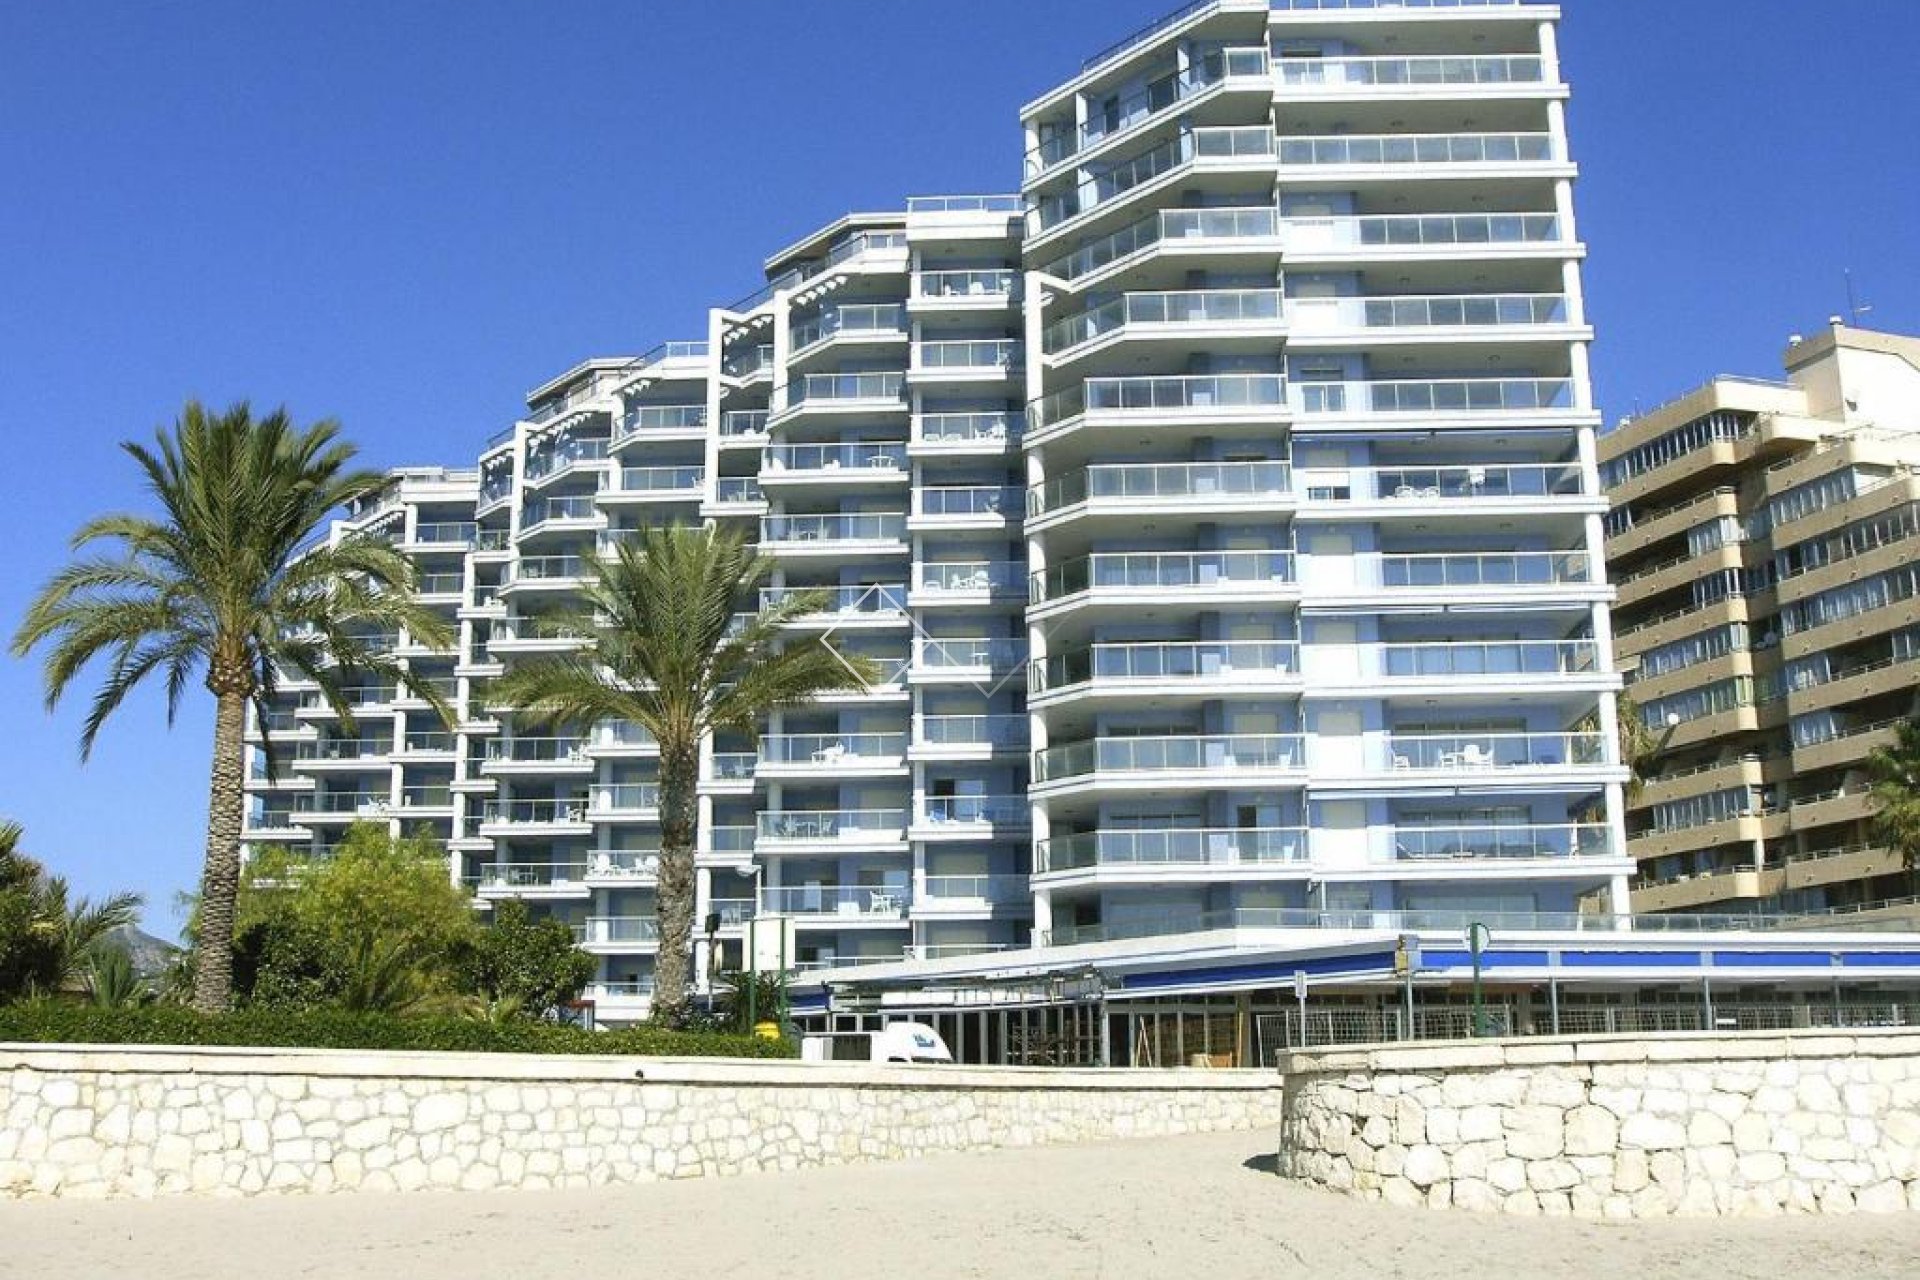 2 bed apartment in Calpe for sale next to beach